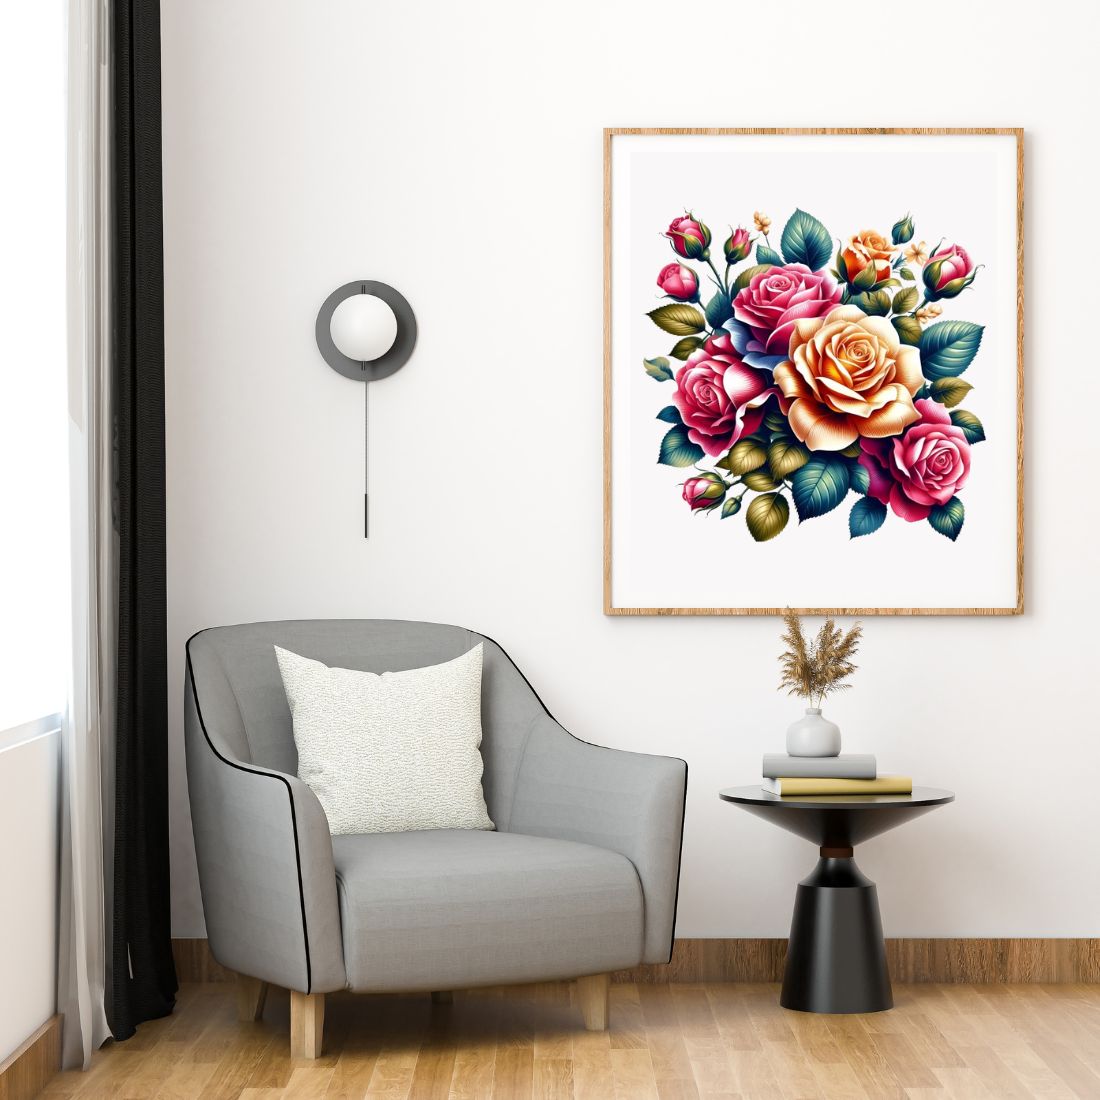 Flowers wall art preview image.